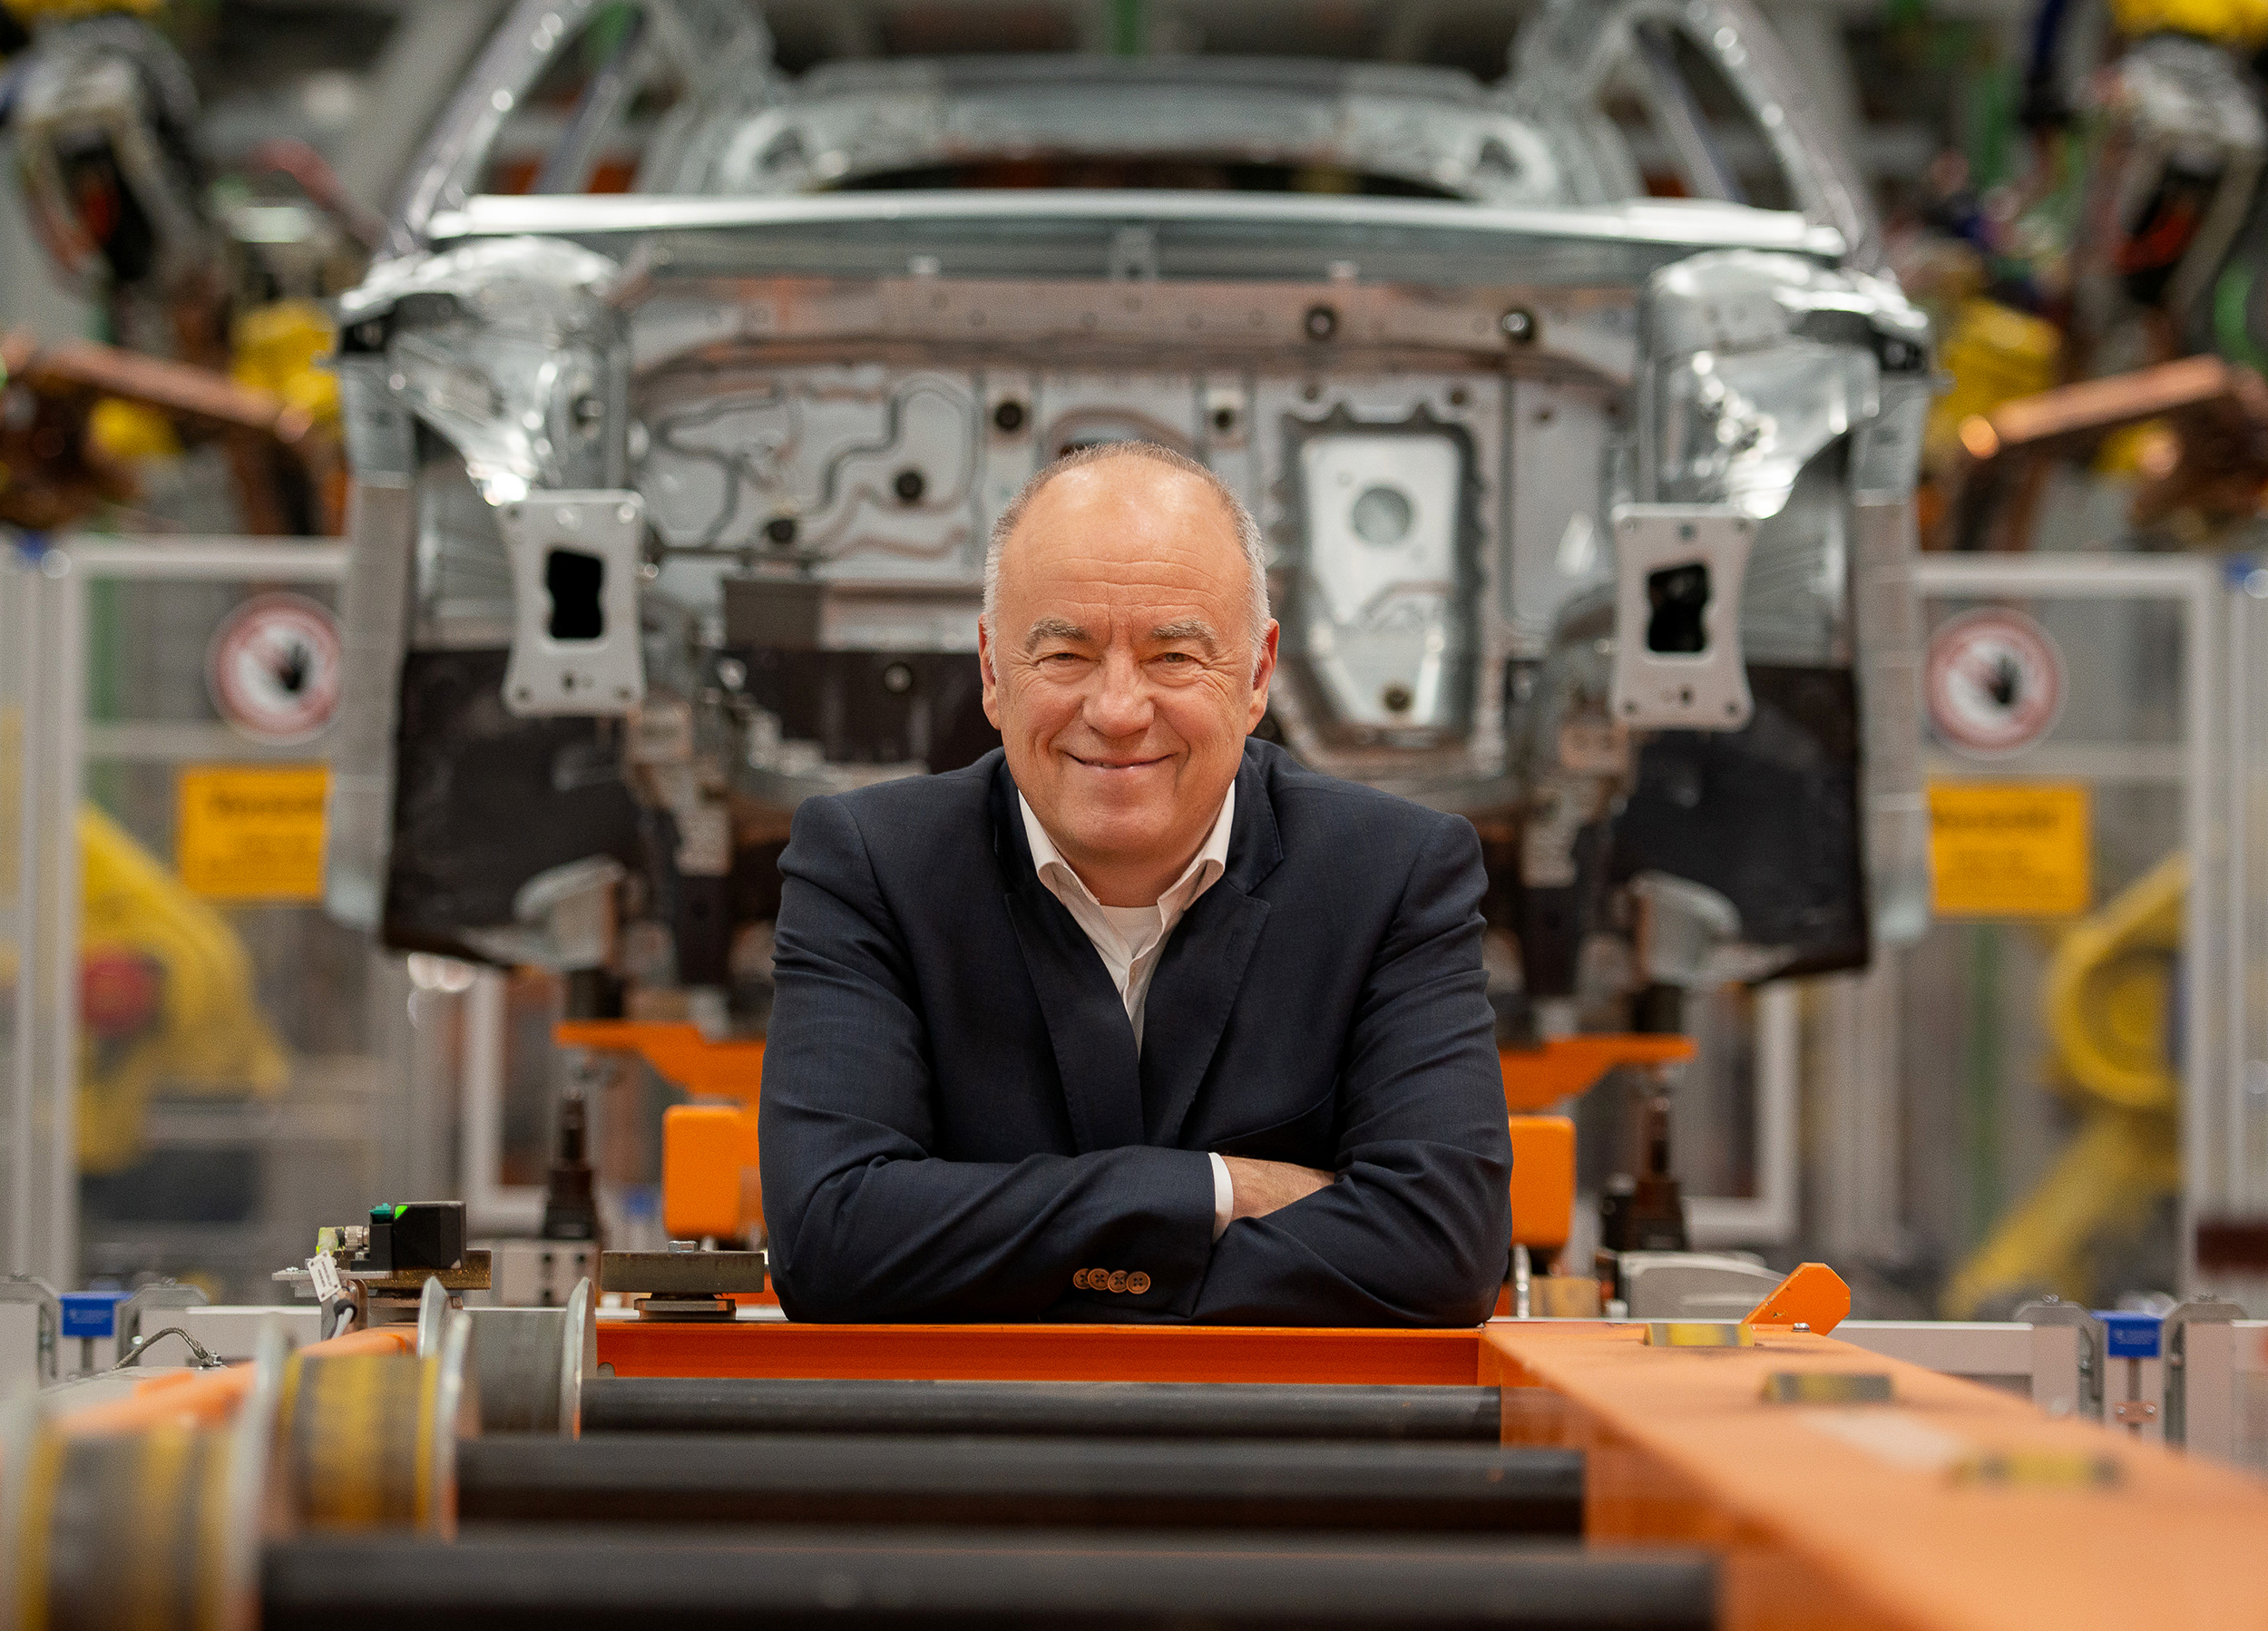 Extensive experience: Production board member Peter Kössler joined Audi in the mid-1980s as a trainee. 